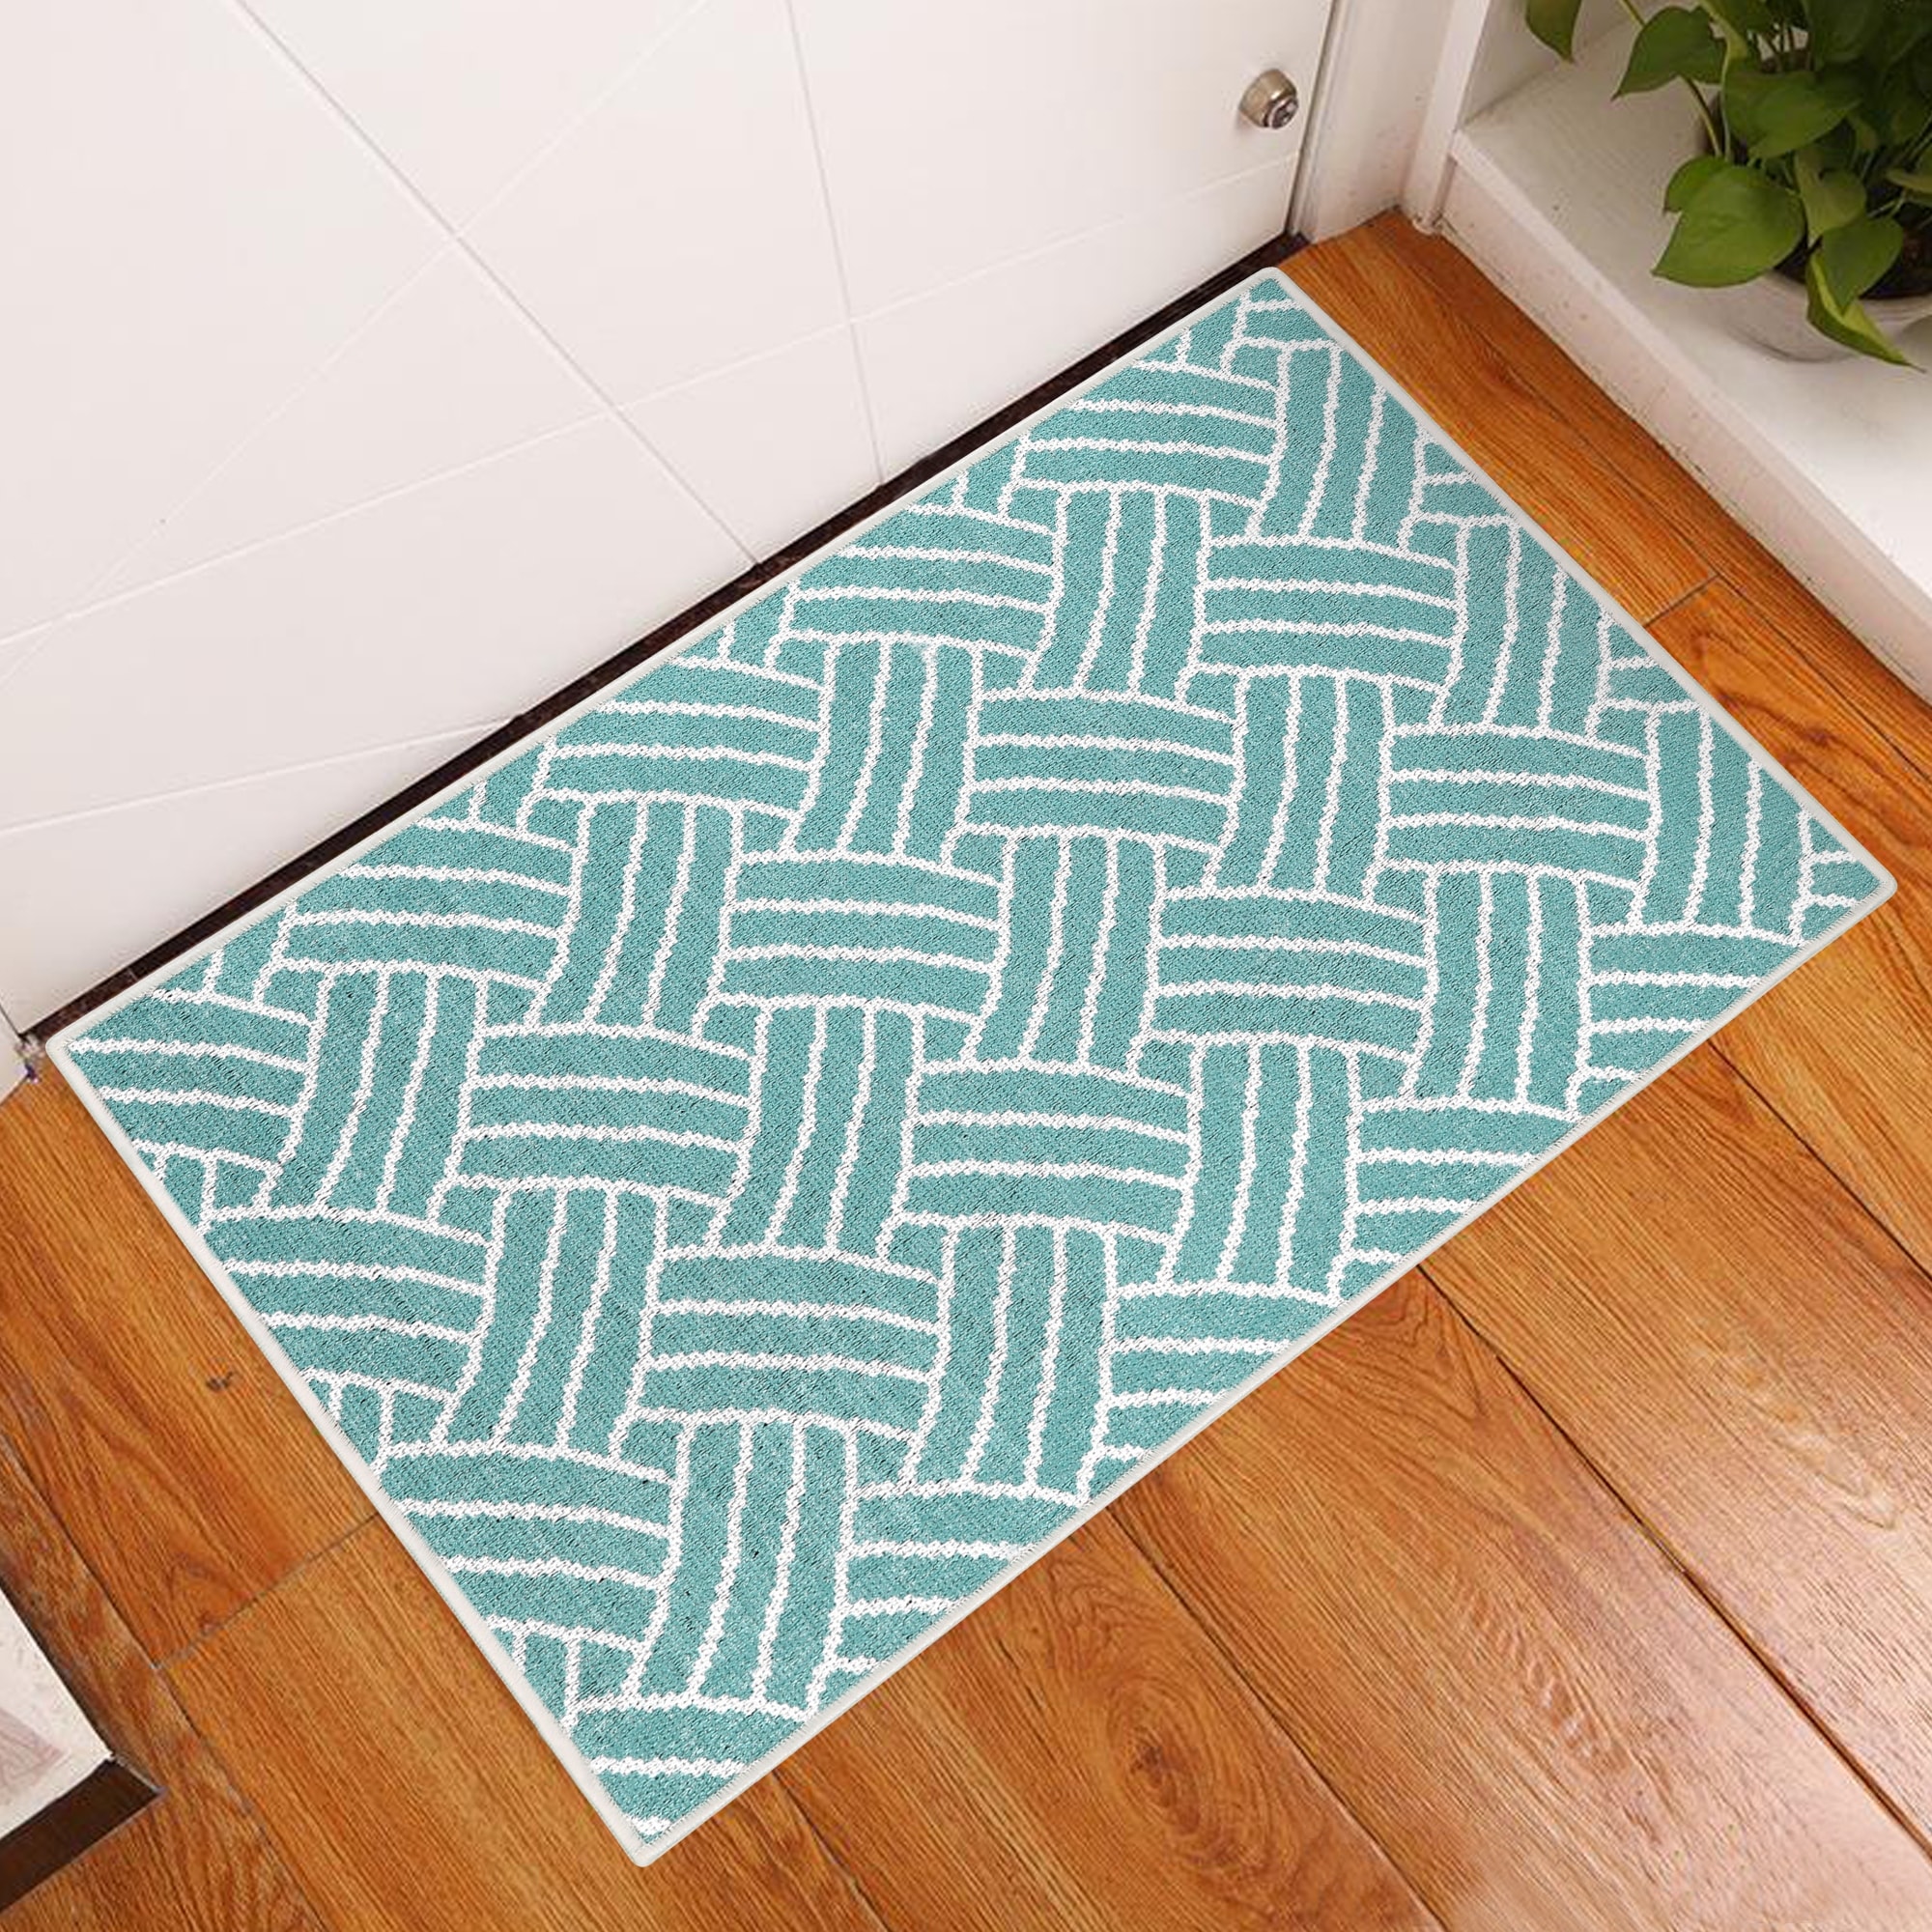 https://ak1.ostkcdn.com/images/products/is/images/direct/7f84a949b57540da039c4372978384b7269c067a/Sisal-Collection-2-x-3-Foot-Rug-Runner-Thin-Non-Slip-Area-Rug---Cotton-Indoor-Rug-for-Front-Door-Foyer-Rug-for-Entryway.jpg